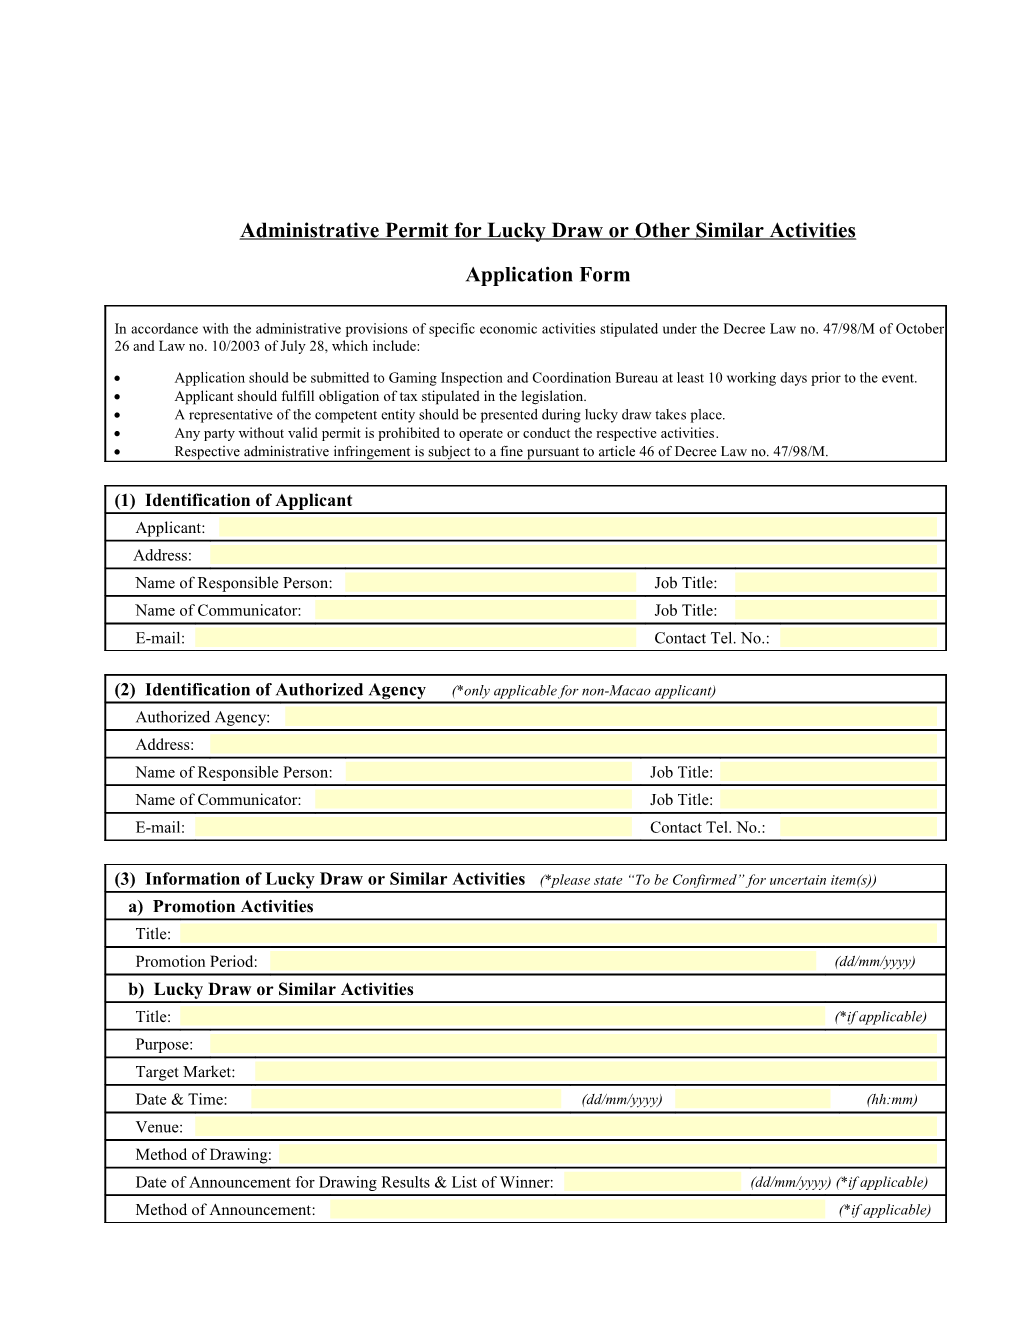 Administrative Permit for Lucky Draw Or Other Similar Activities Application Form